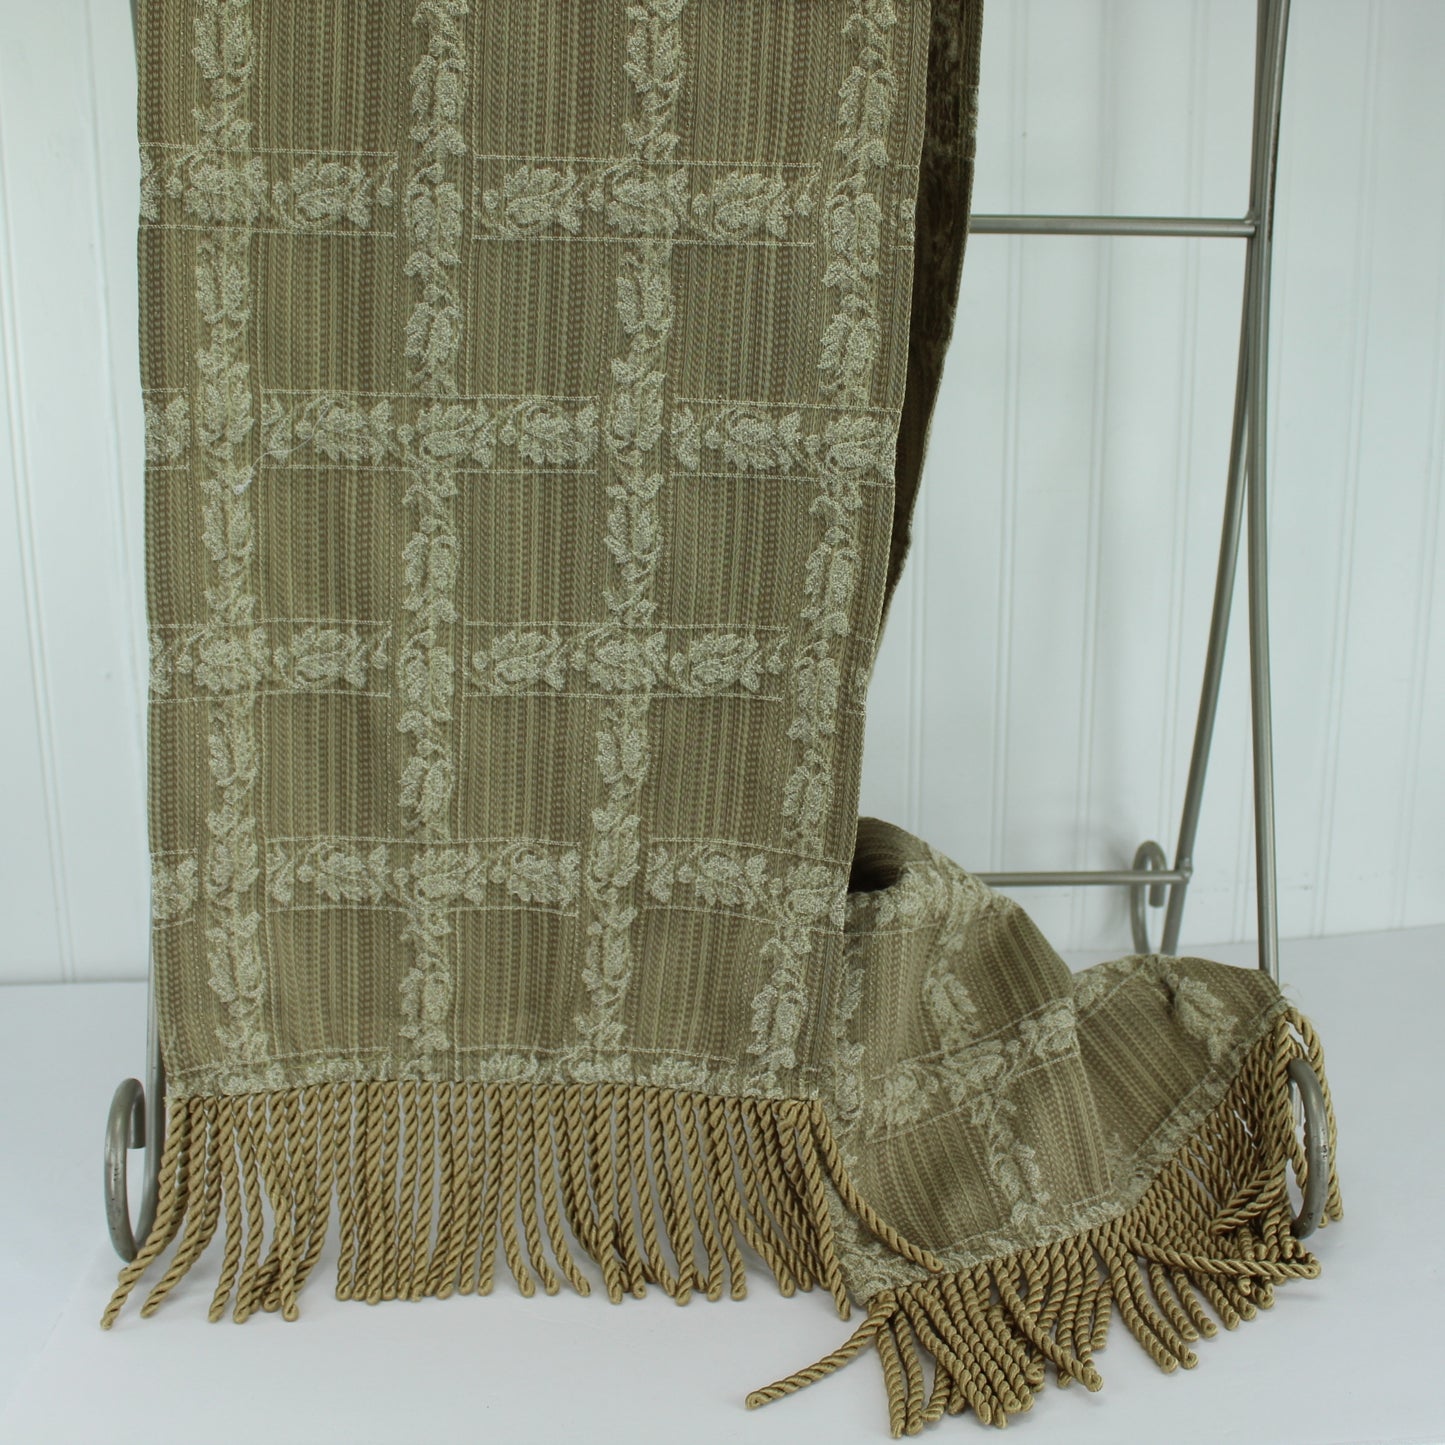 Heavy Fringed Table Runner Decor Shawl Shades Coffee Brown 74" X 12" shoulder wrap for coat suit